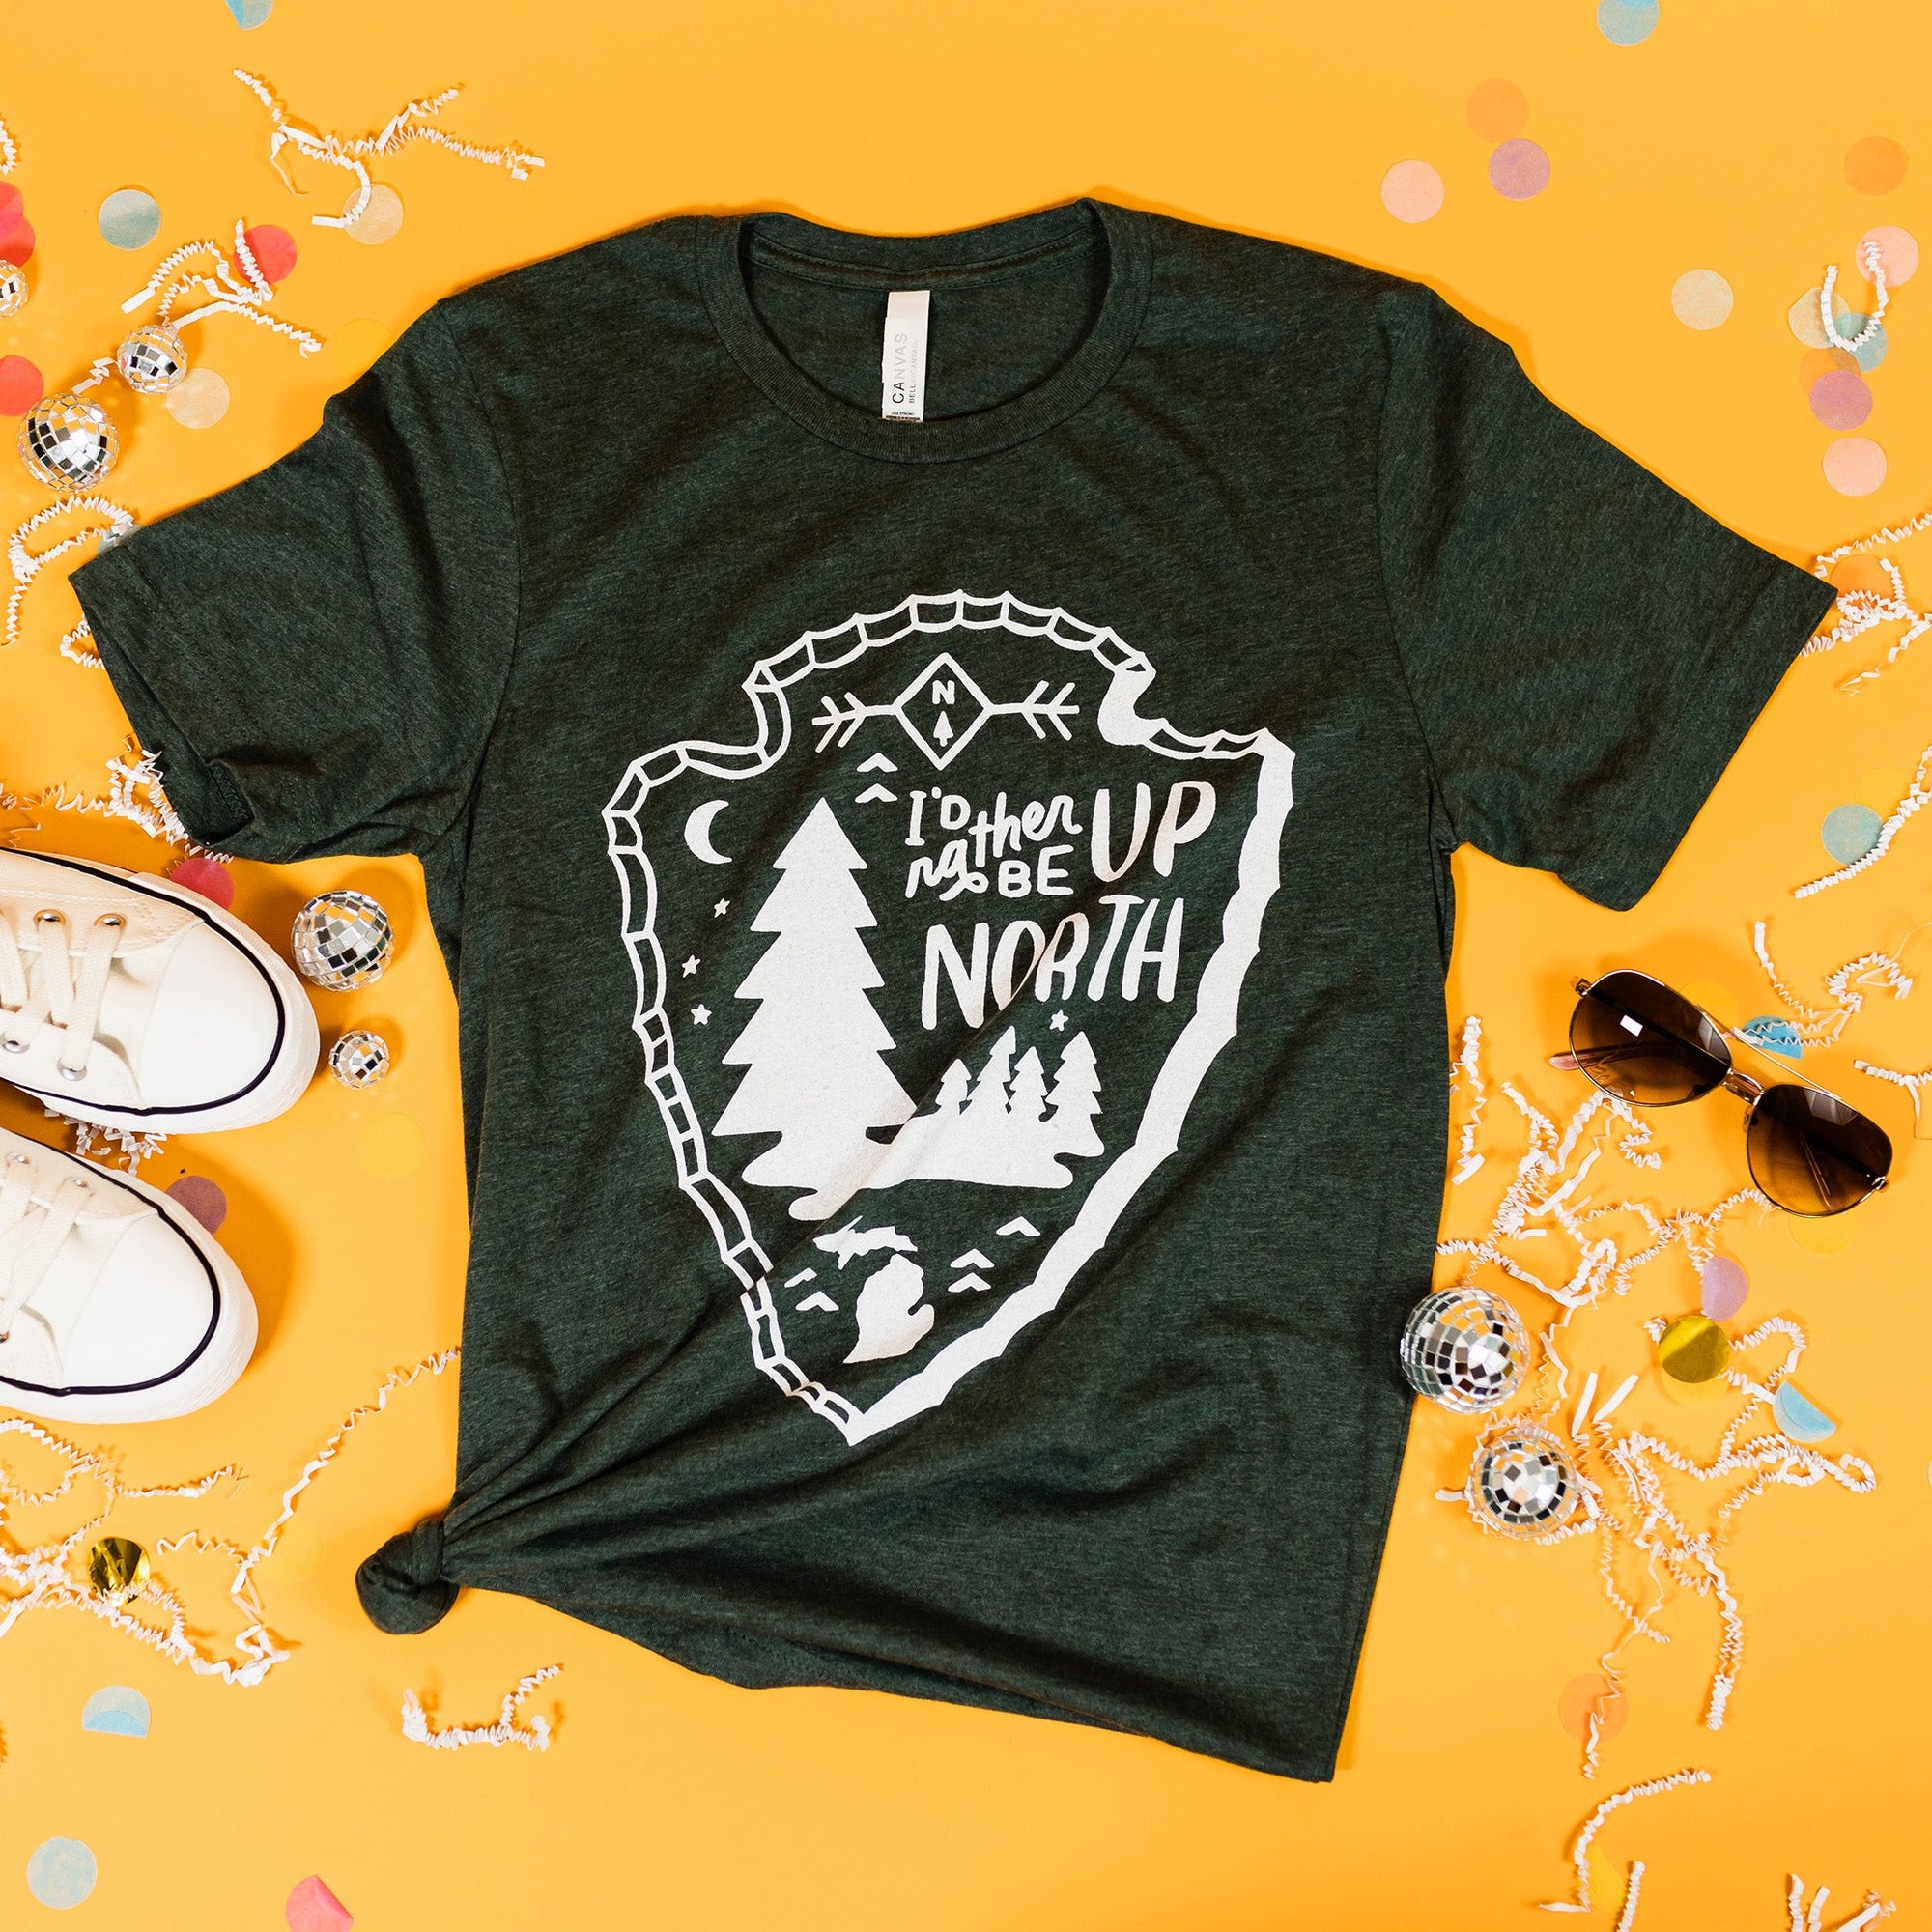 On a sunny mustard background sits a t-shirt with white crinkle and big, colorful confetti scattered around. There are mini disco balls, sunglasses, and a pair of white sneakers. This weathered forest green tee features hand-lettering and various custom illustrations enclosed by an arrowhead design in white and says "I'd rather be UP NORTH."